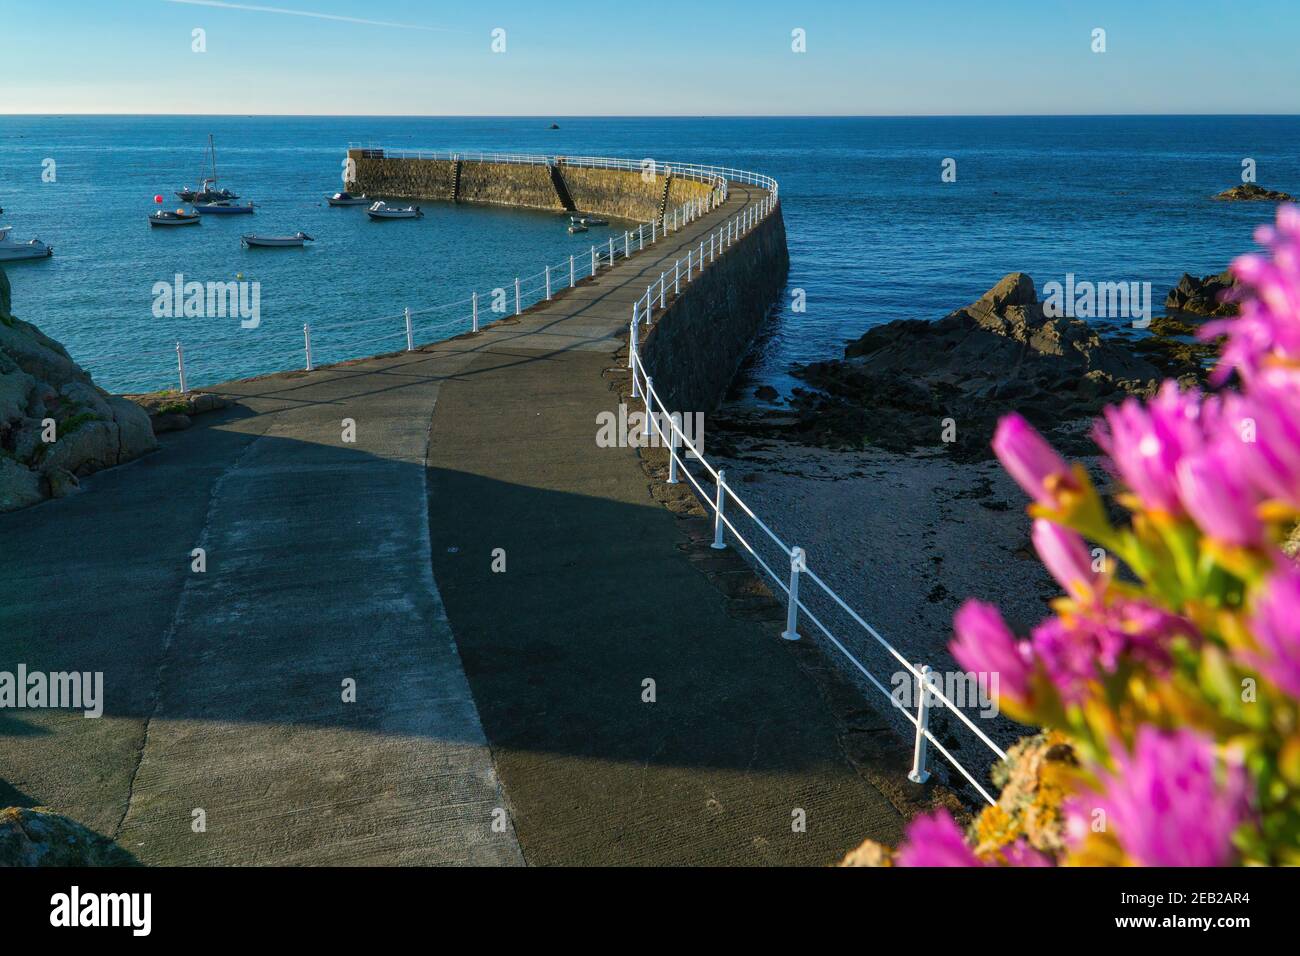 High Tide at La Rocque Harbour, Grouville, Jersey,Channel Islands. Stock Photo